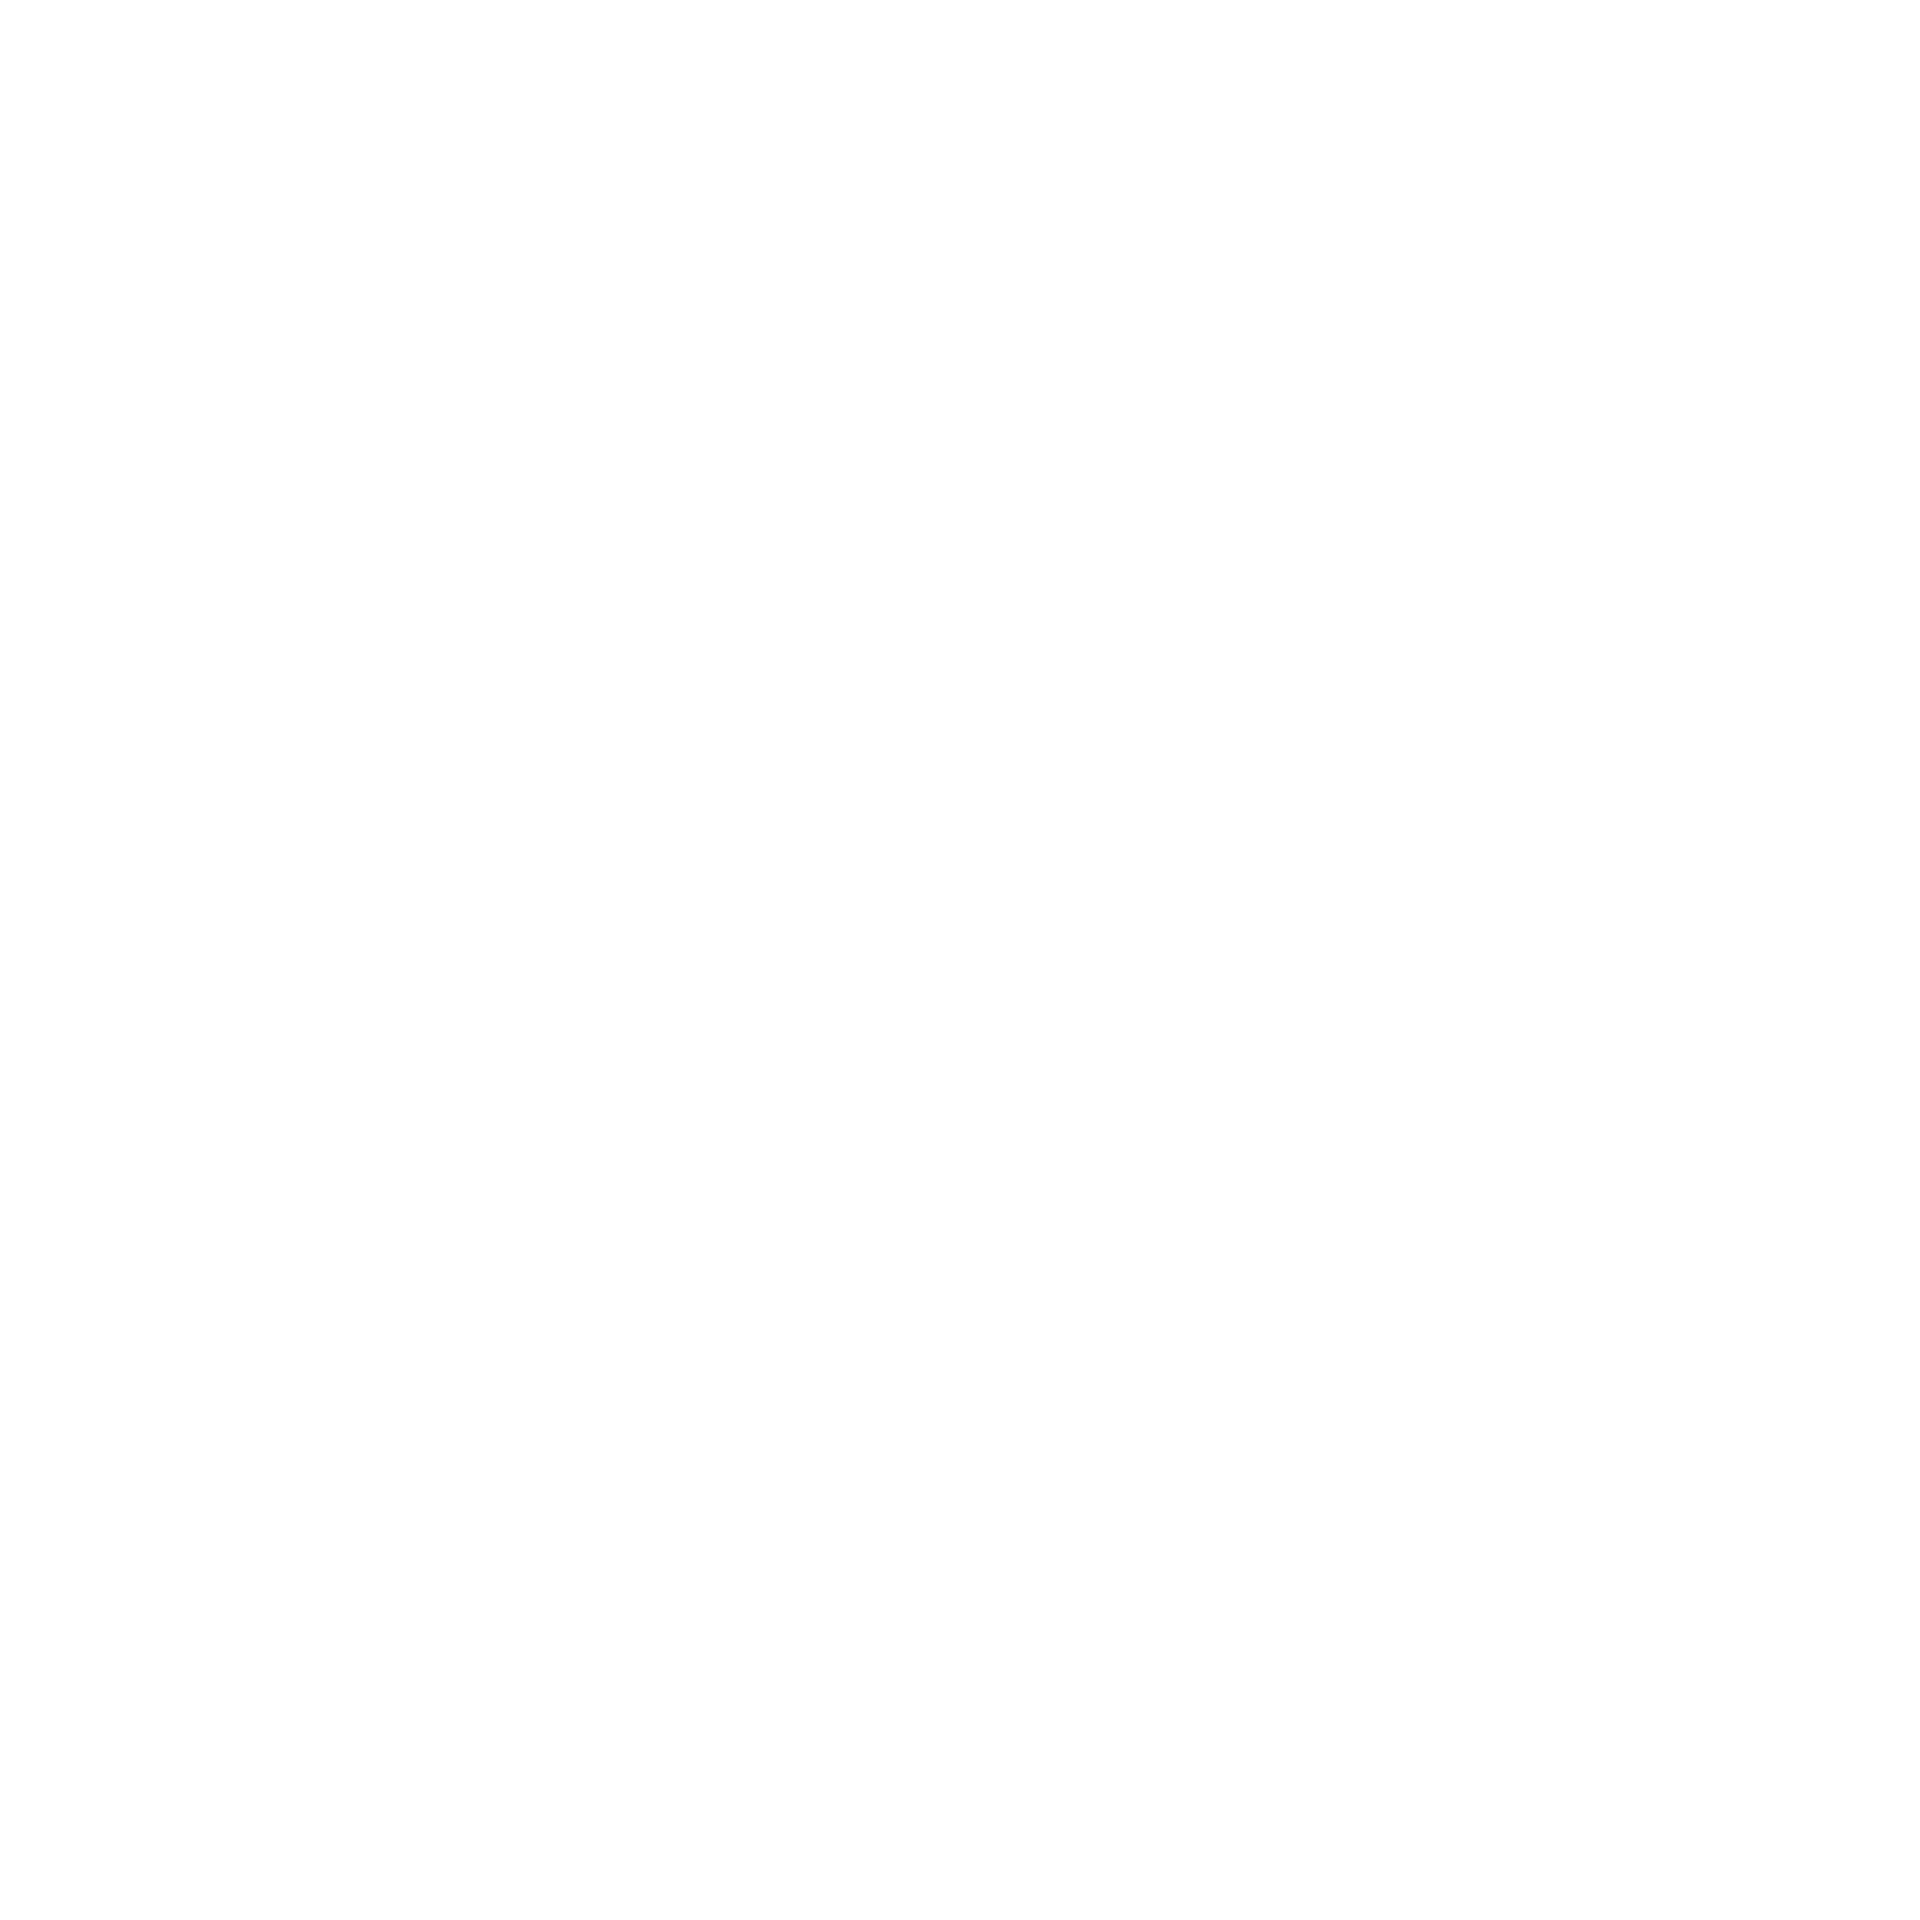 Palms Payment Solutions